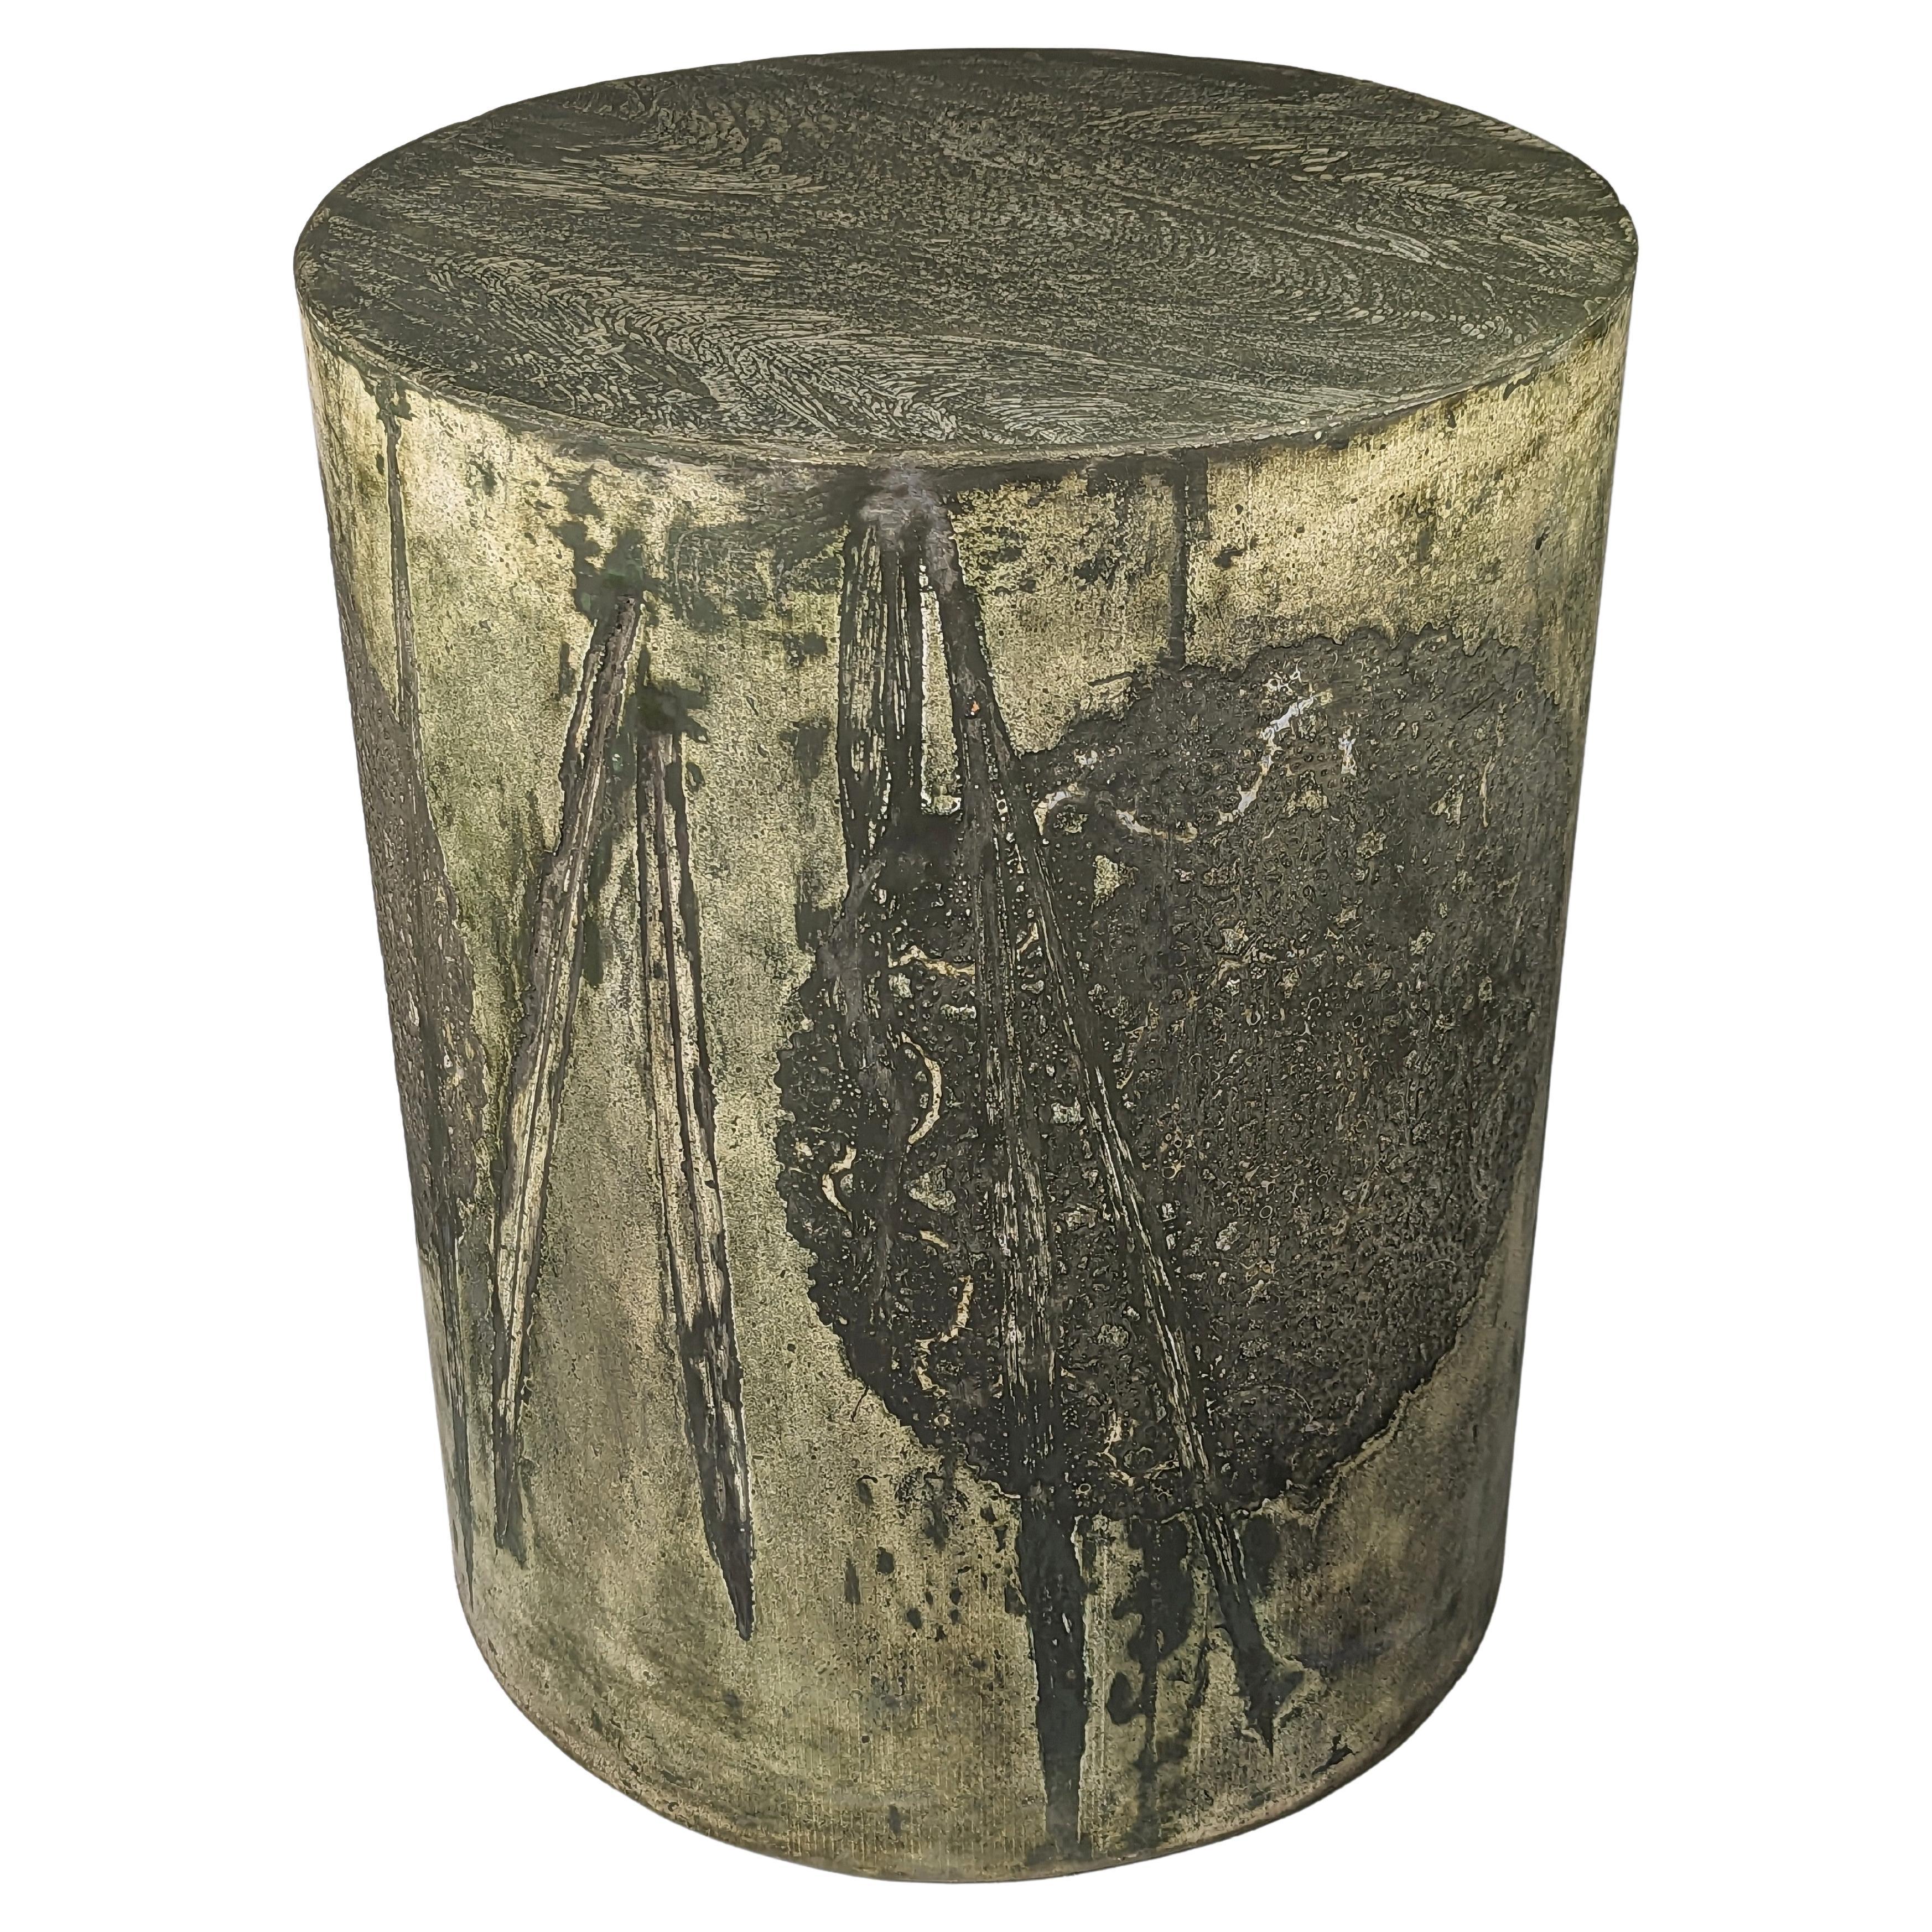 Green Concrete Side Table with Intricate Pattern, 'Unearthed Lineage' For Sale